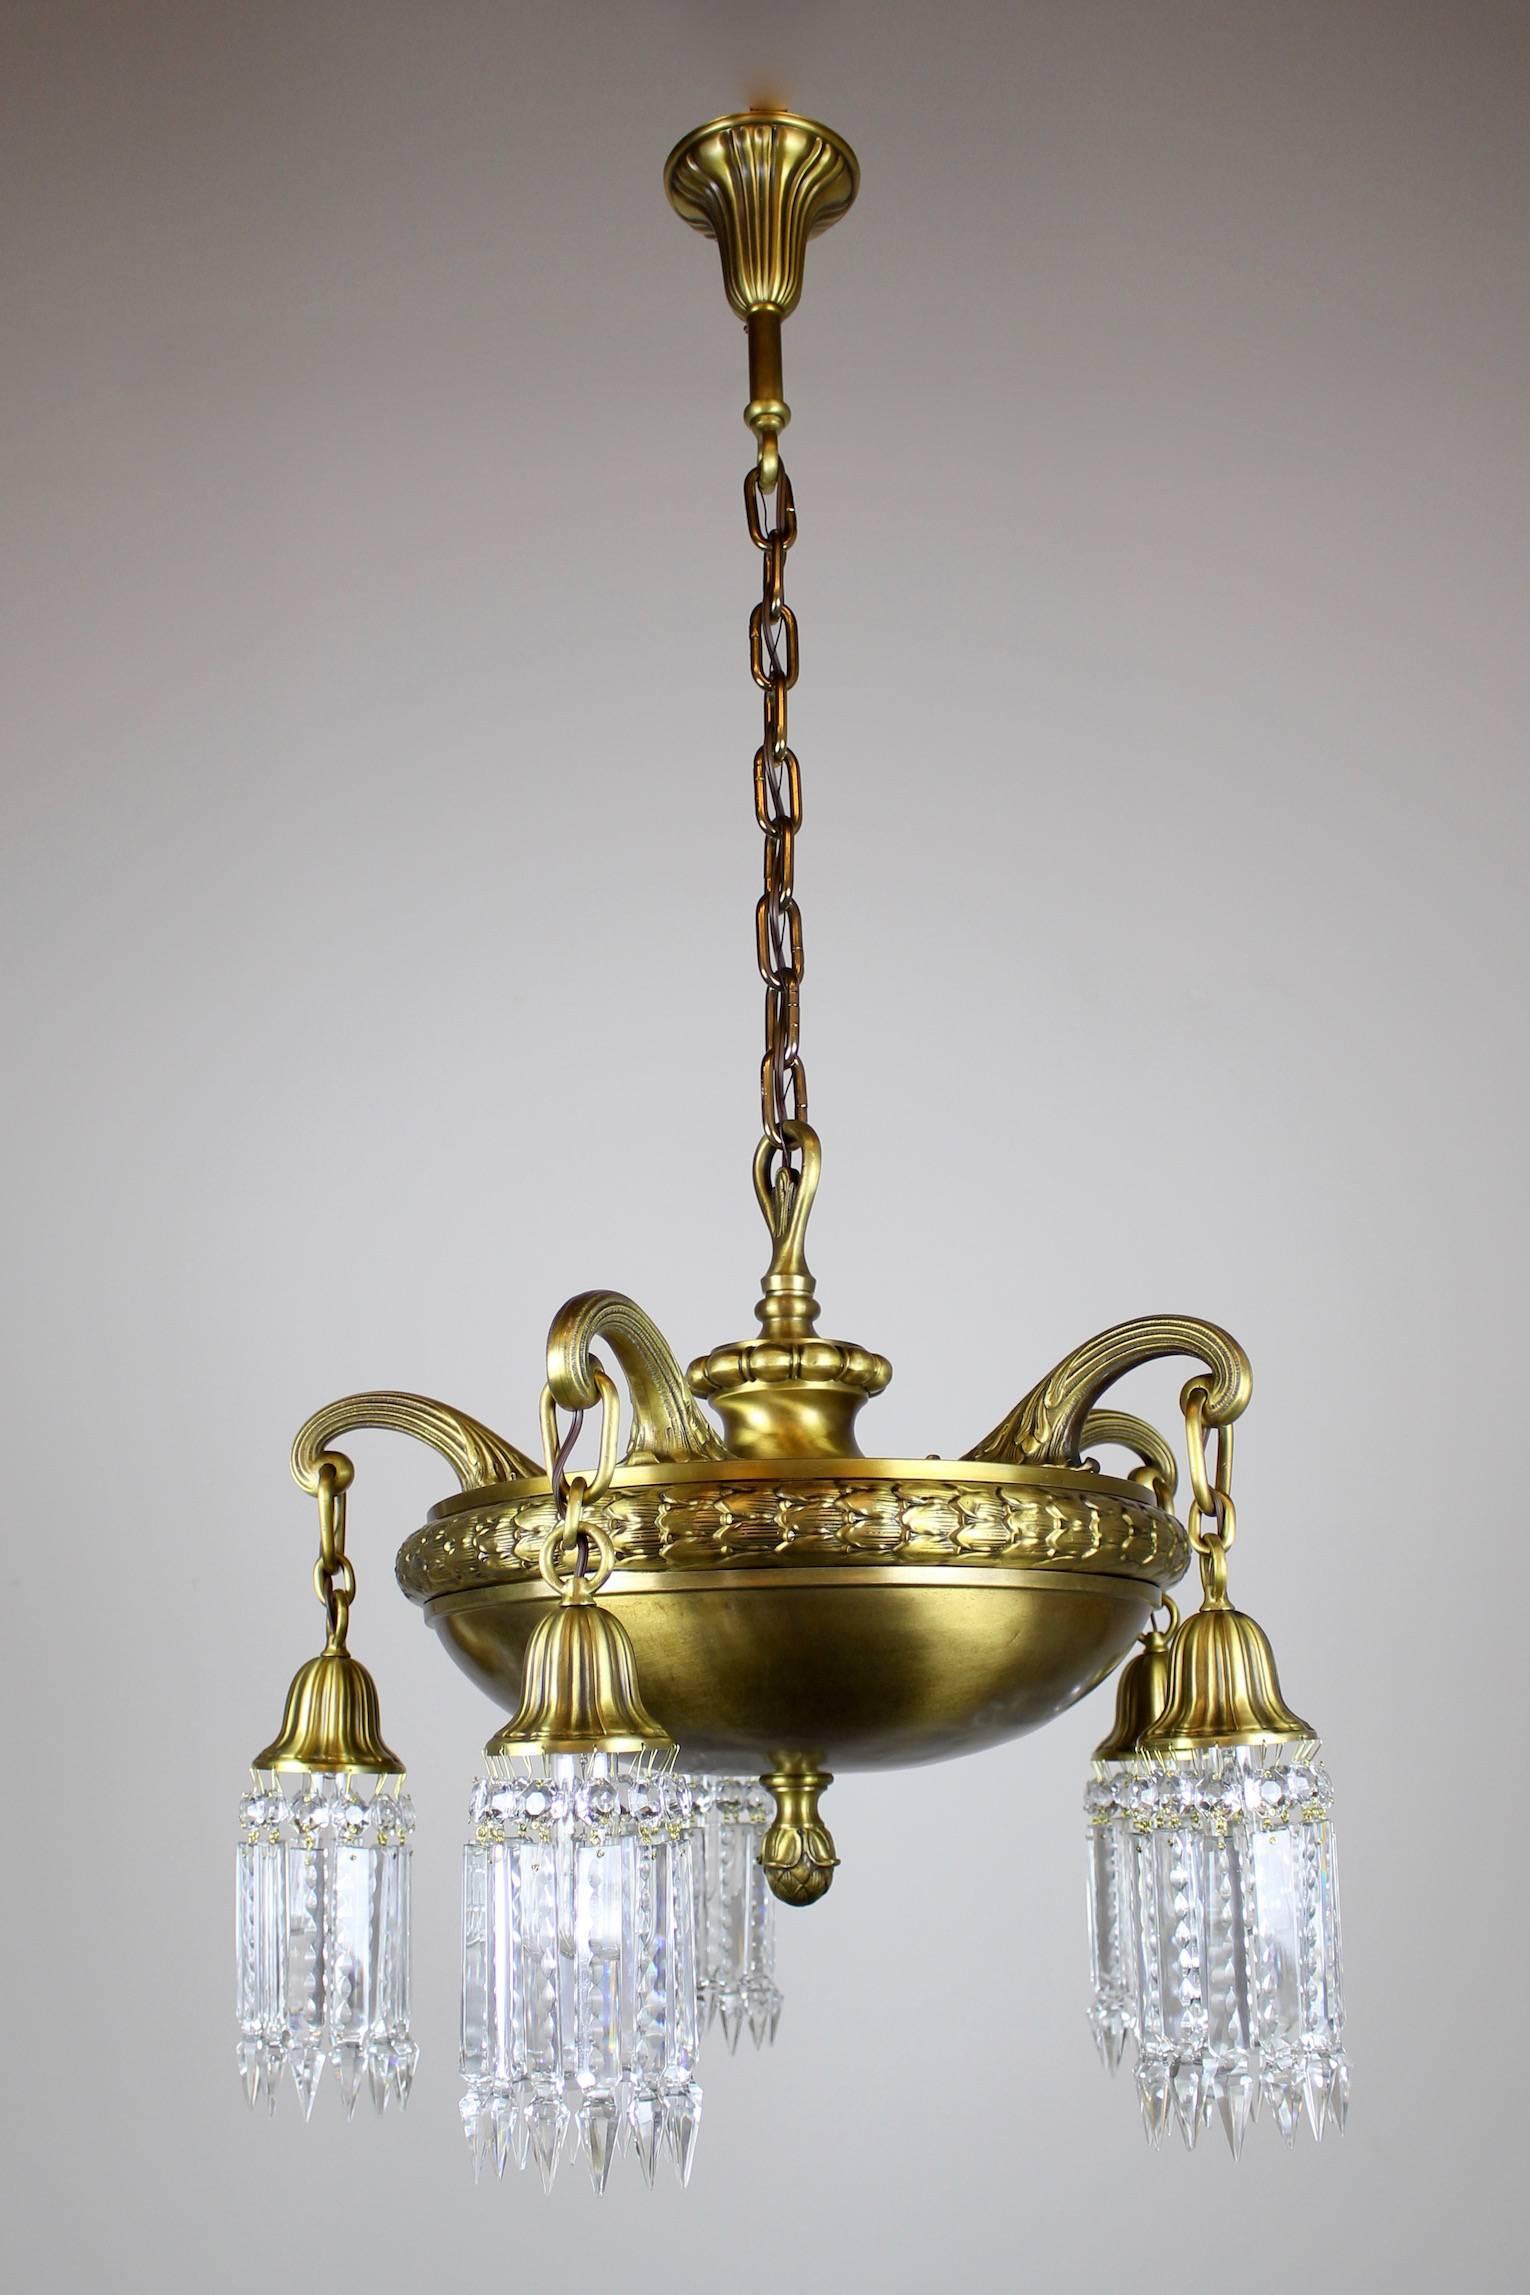 Early 20th Century Beaux Arts Crystal Chandelier For Sale